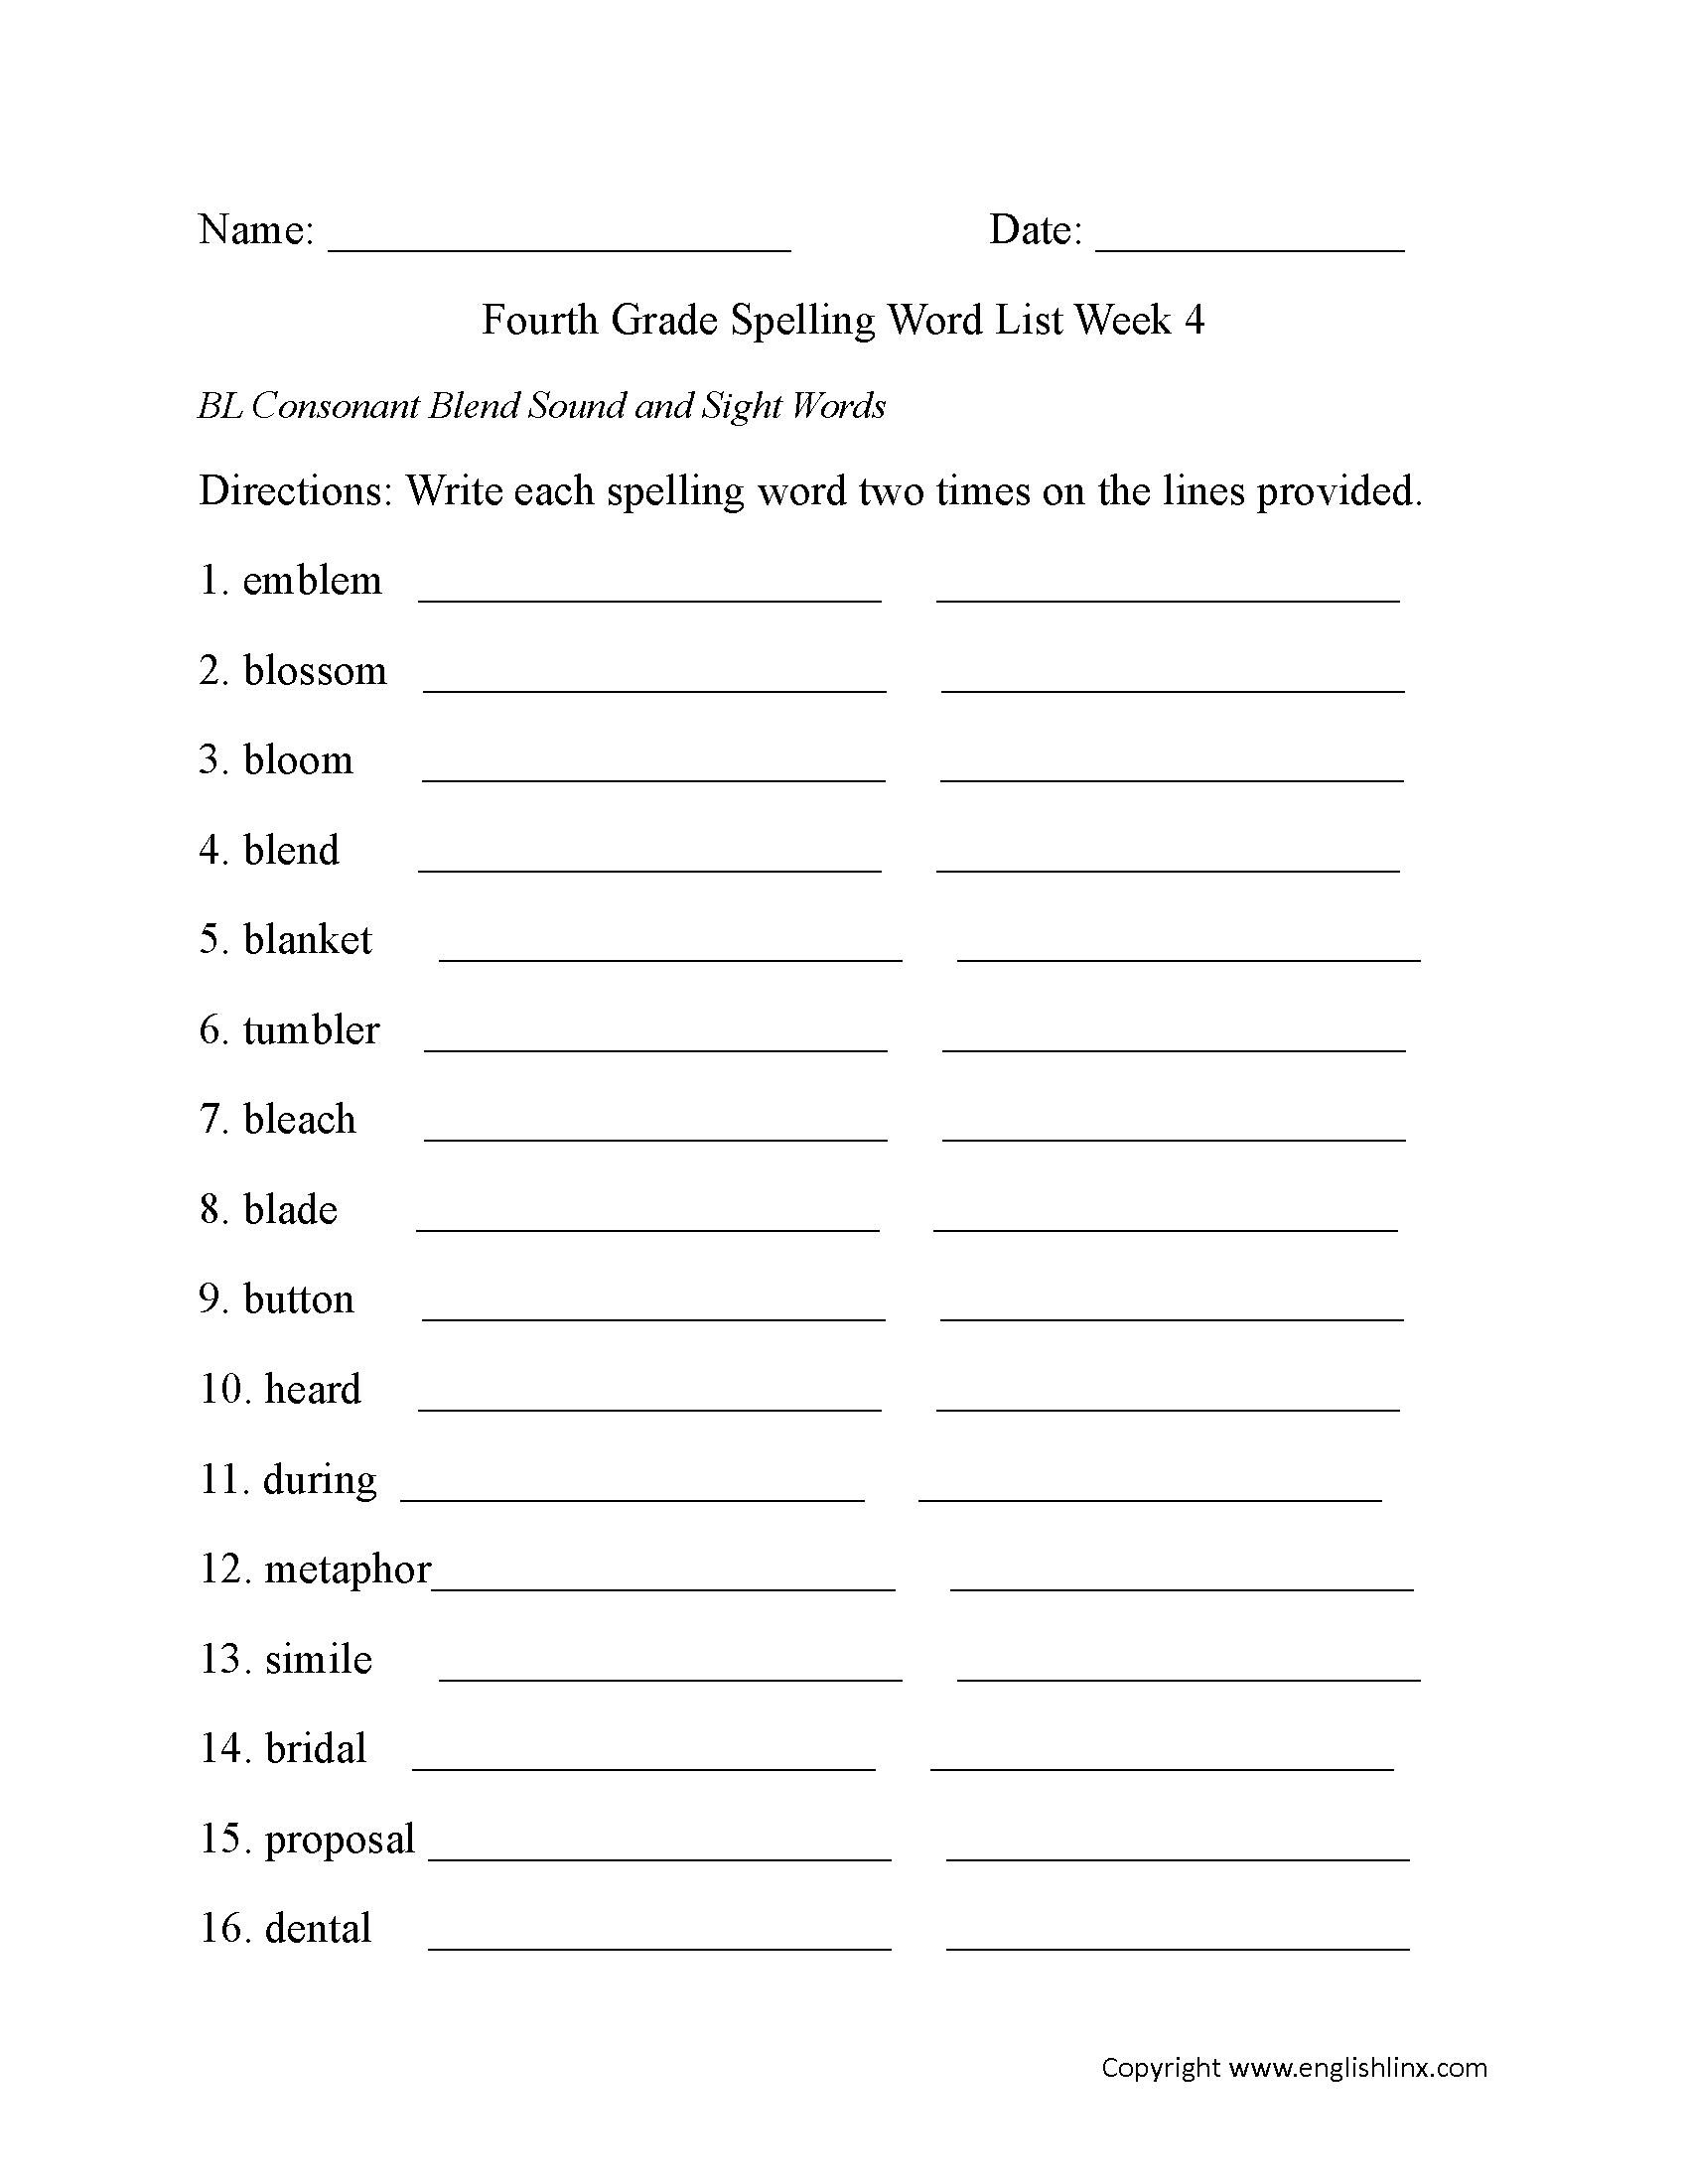 Week 4 BL Consonant and Sight Words Fourth Grade Spelling Words Worksheets